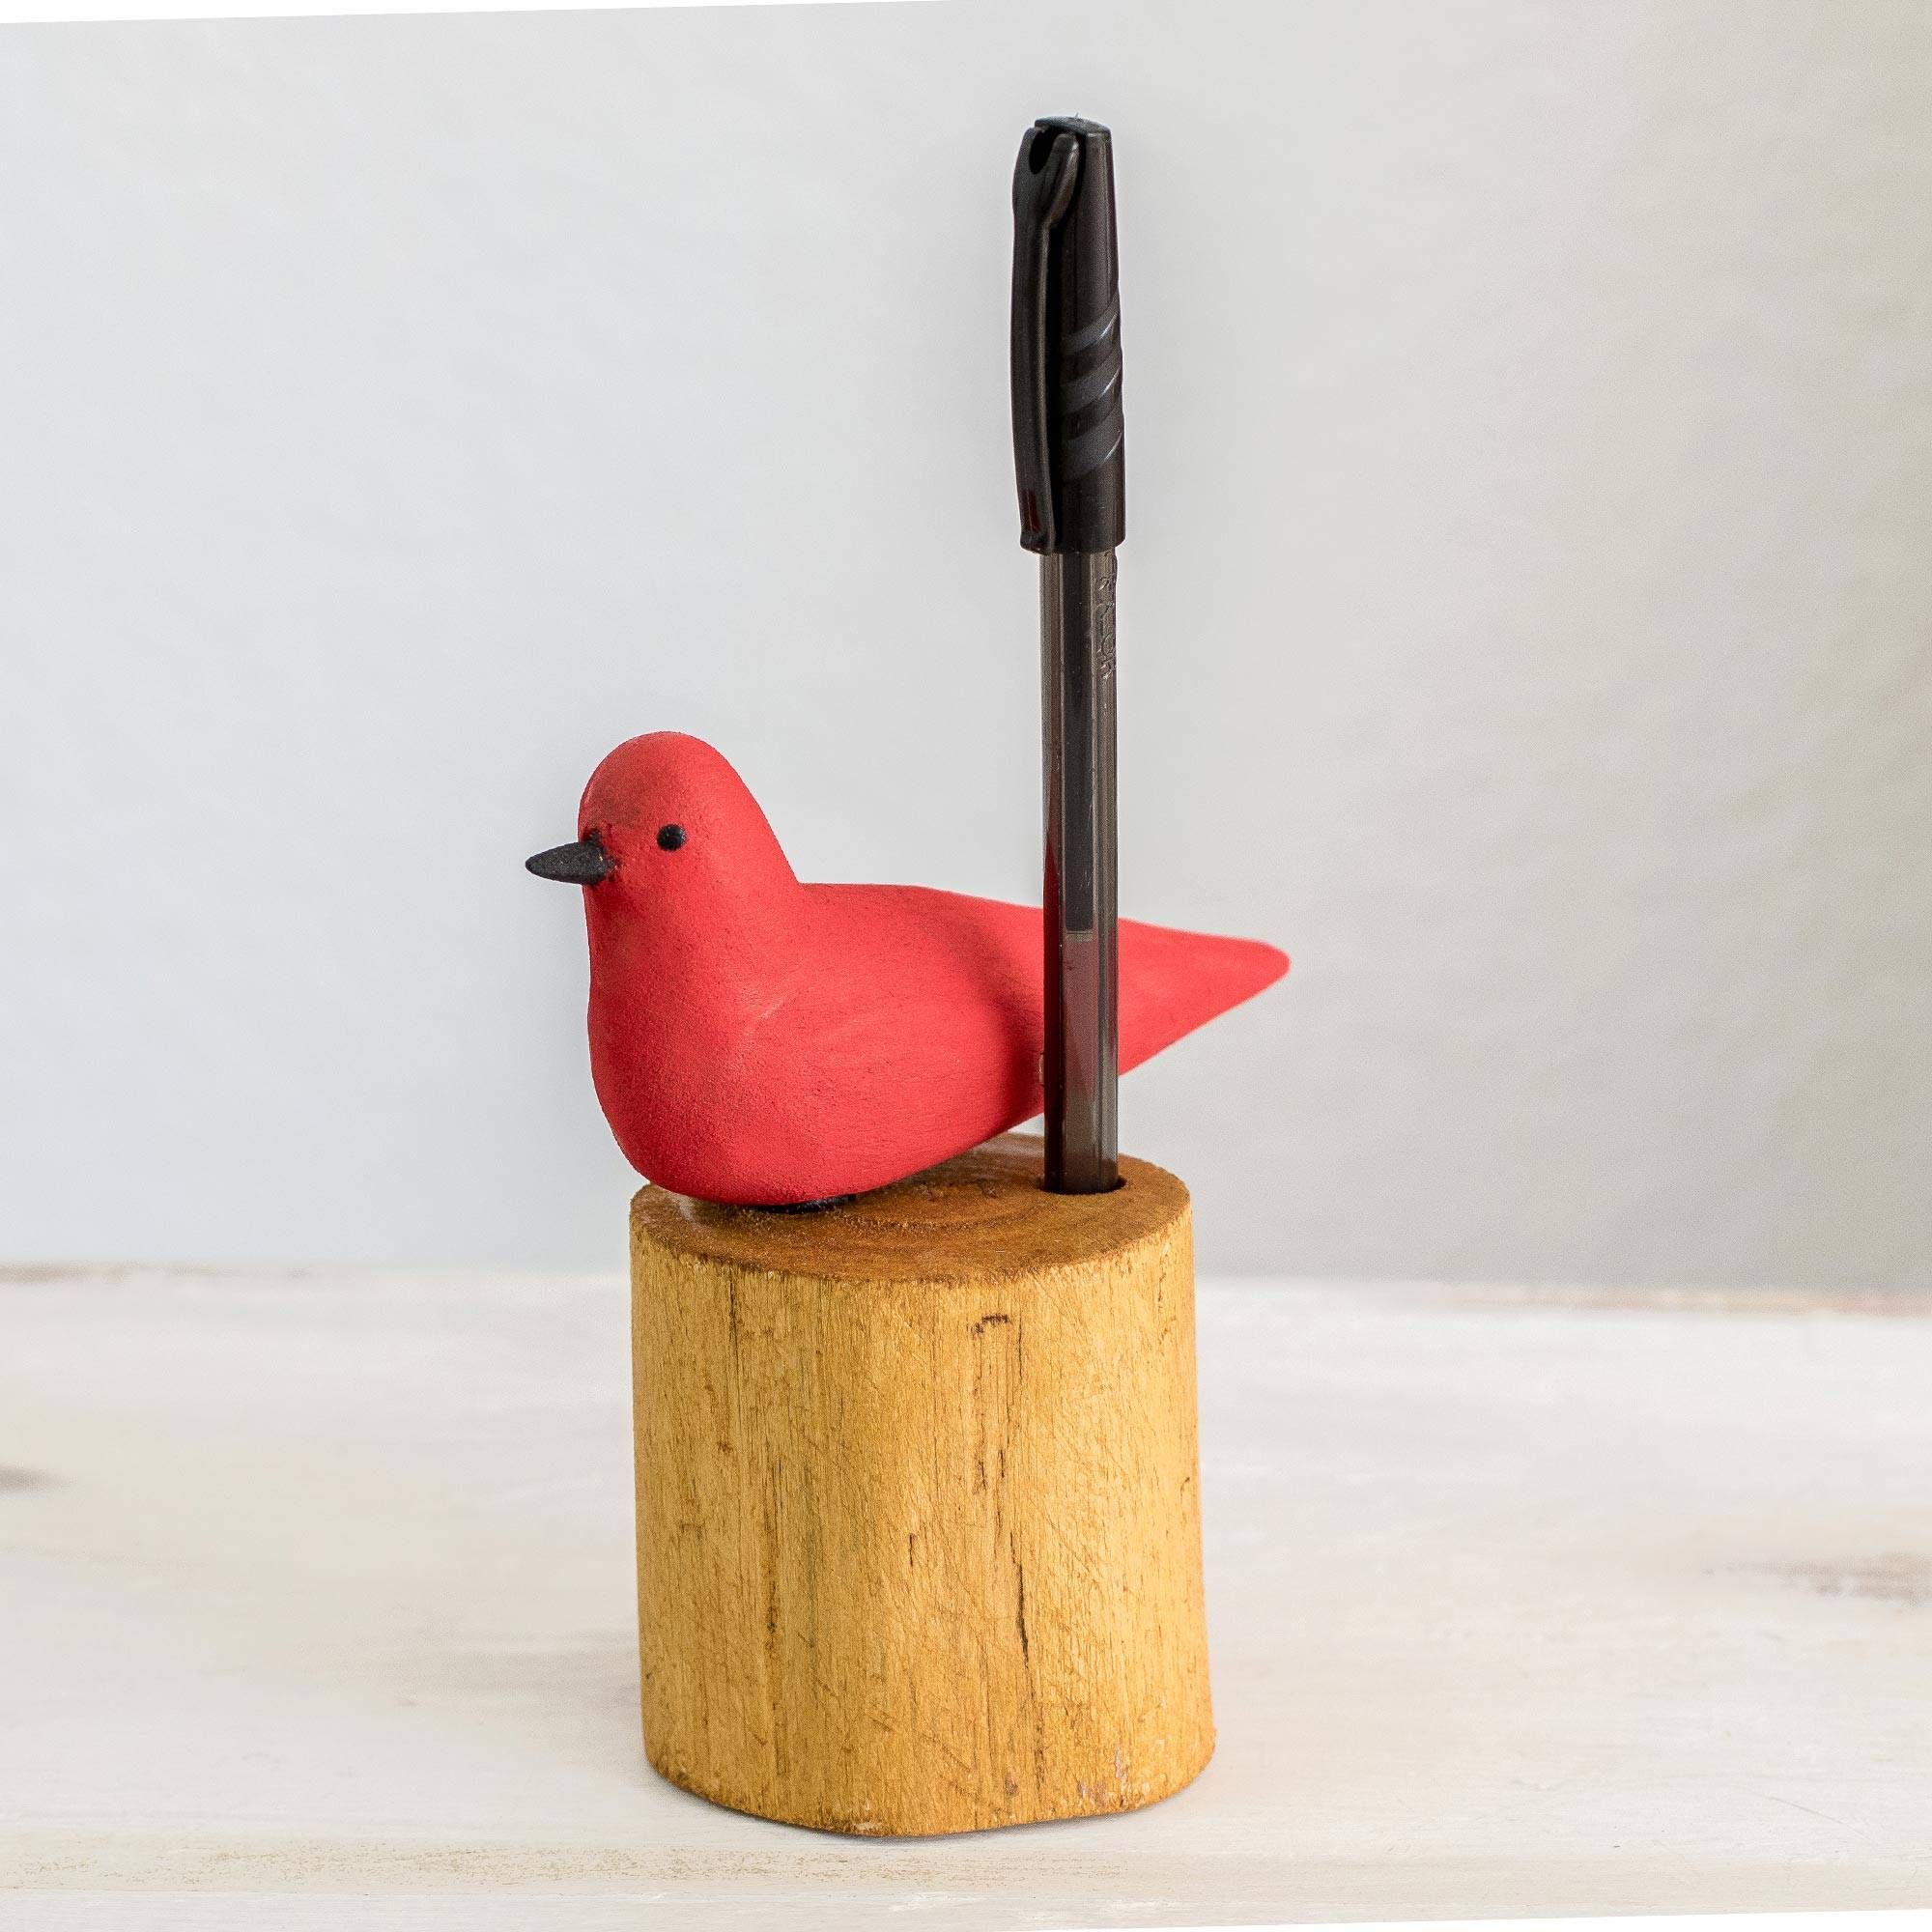 Pencil Holder and Its Impact